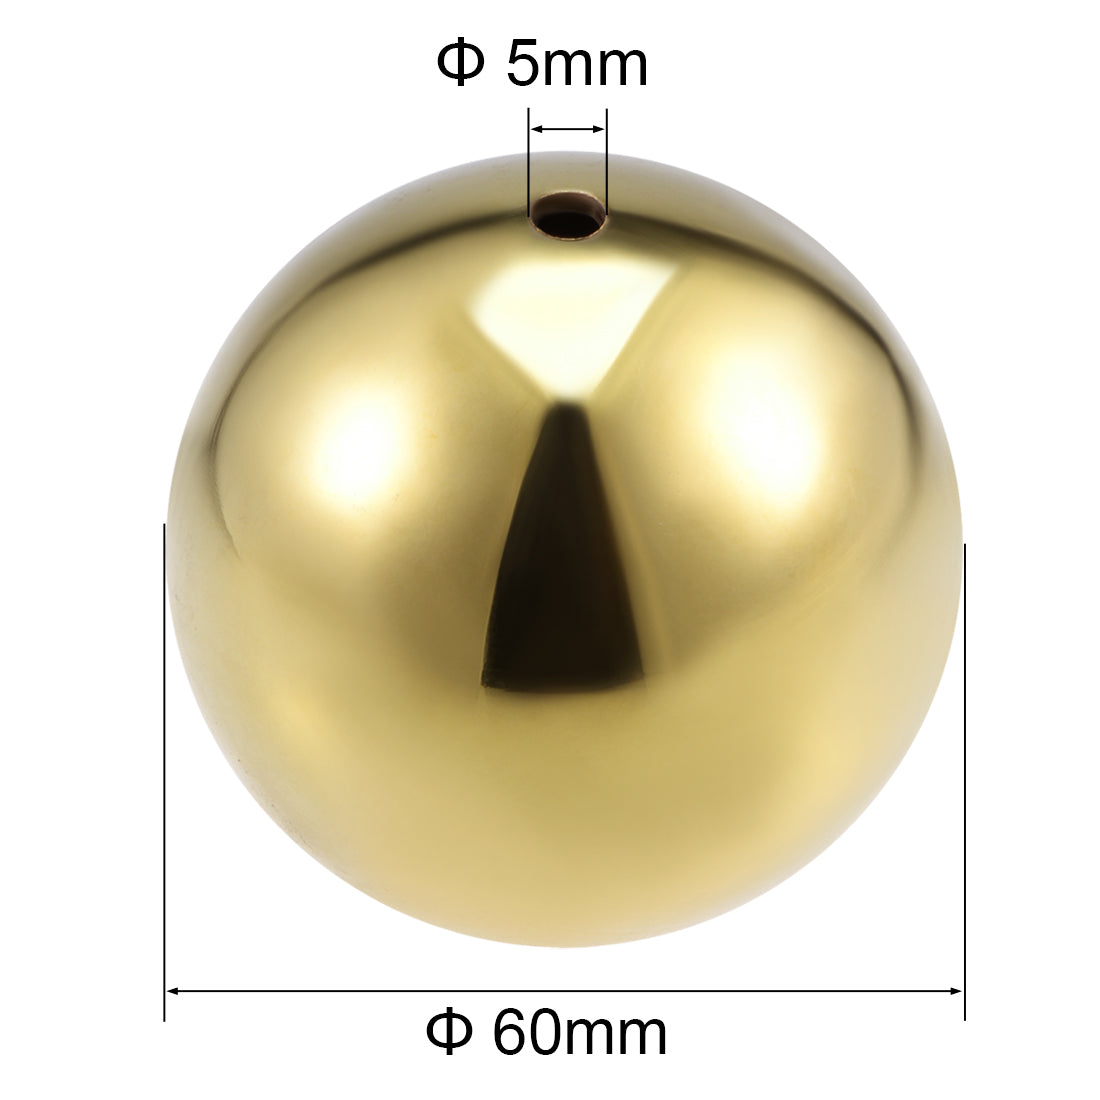 uxcell Uxcell 60mm Dia 201 Stainless Steel Hollow Cap Ball Spheres for Handrail Stair Newel Post Gold Tone 5pcs